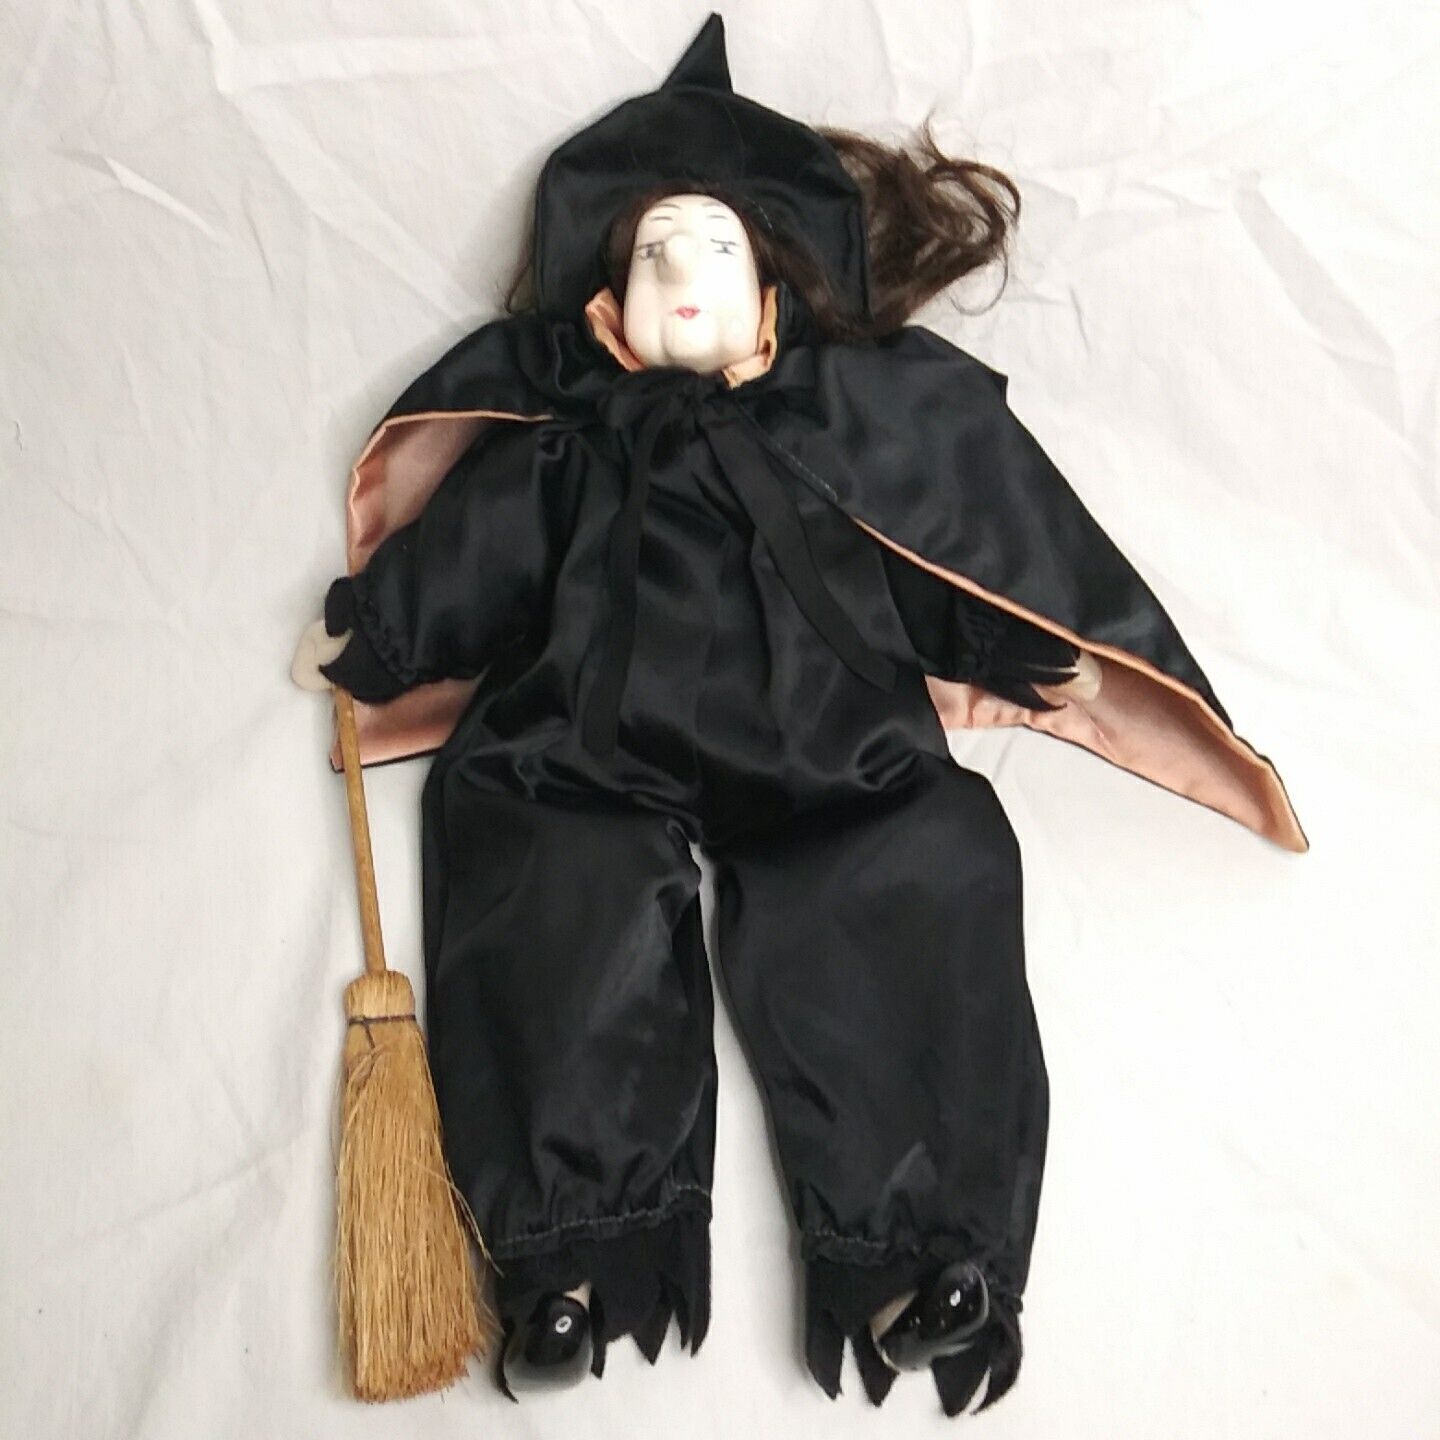  Porcelain Witch Doll With Broom 12” Tall Vintage Victoria Impex